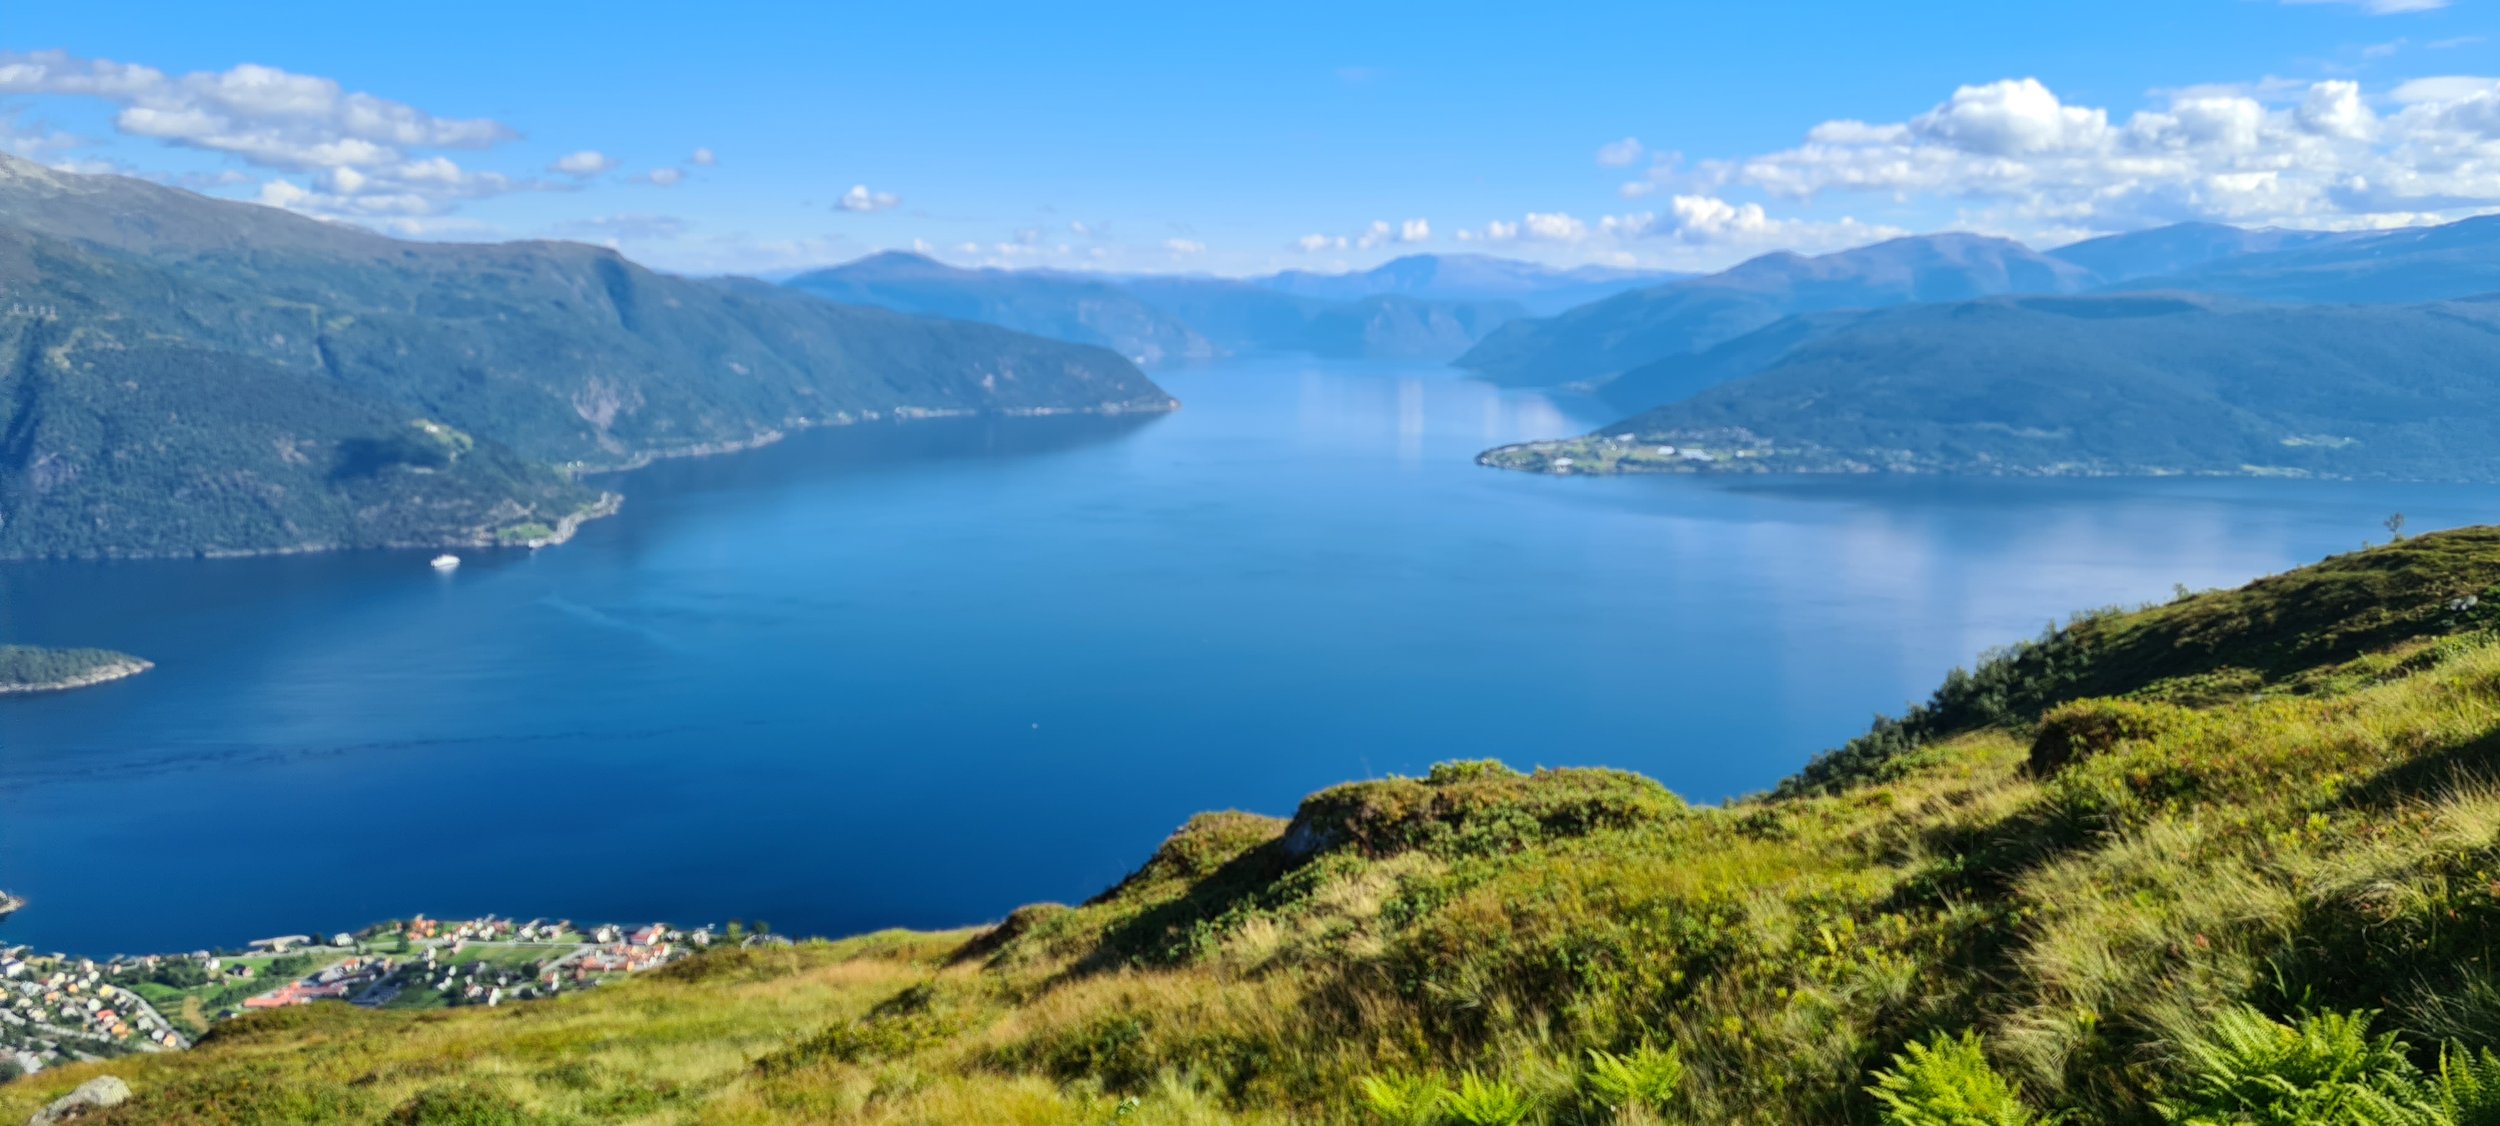 Experience Balestrand and the Sognefjord this autumn